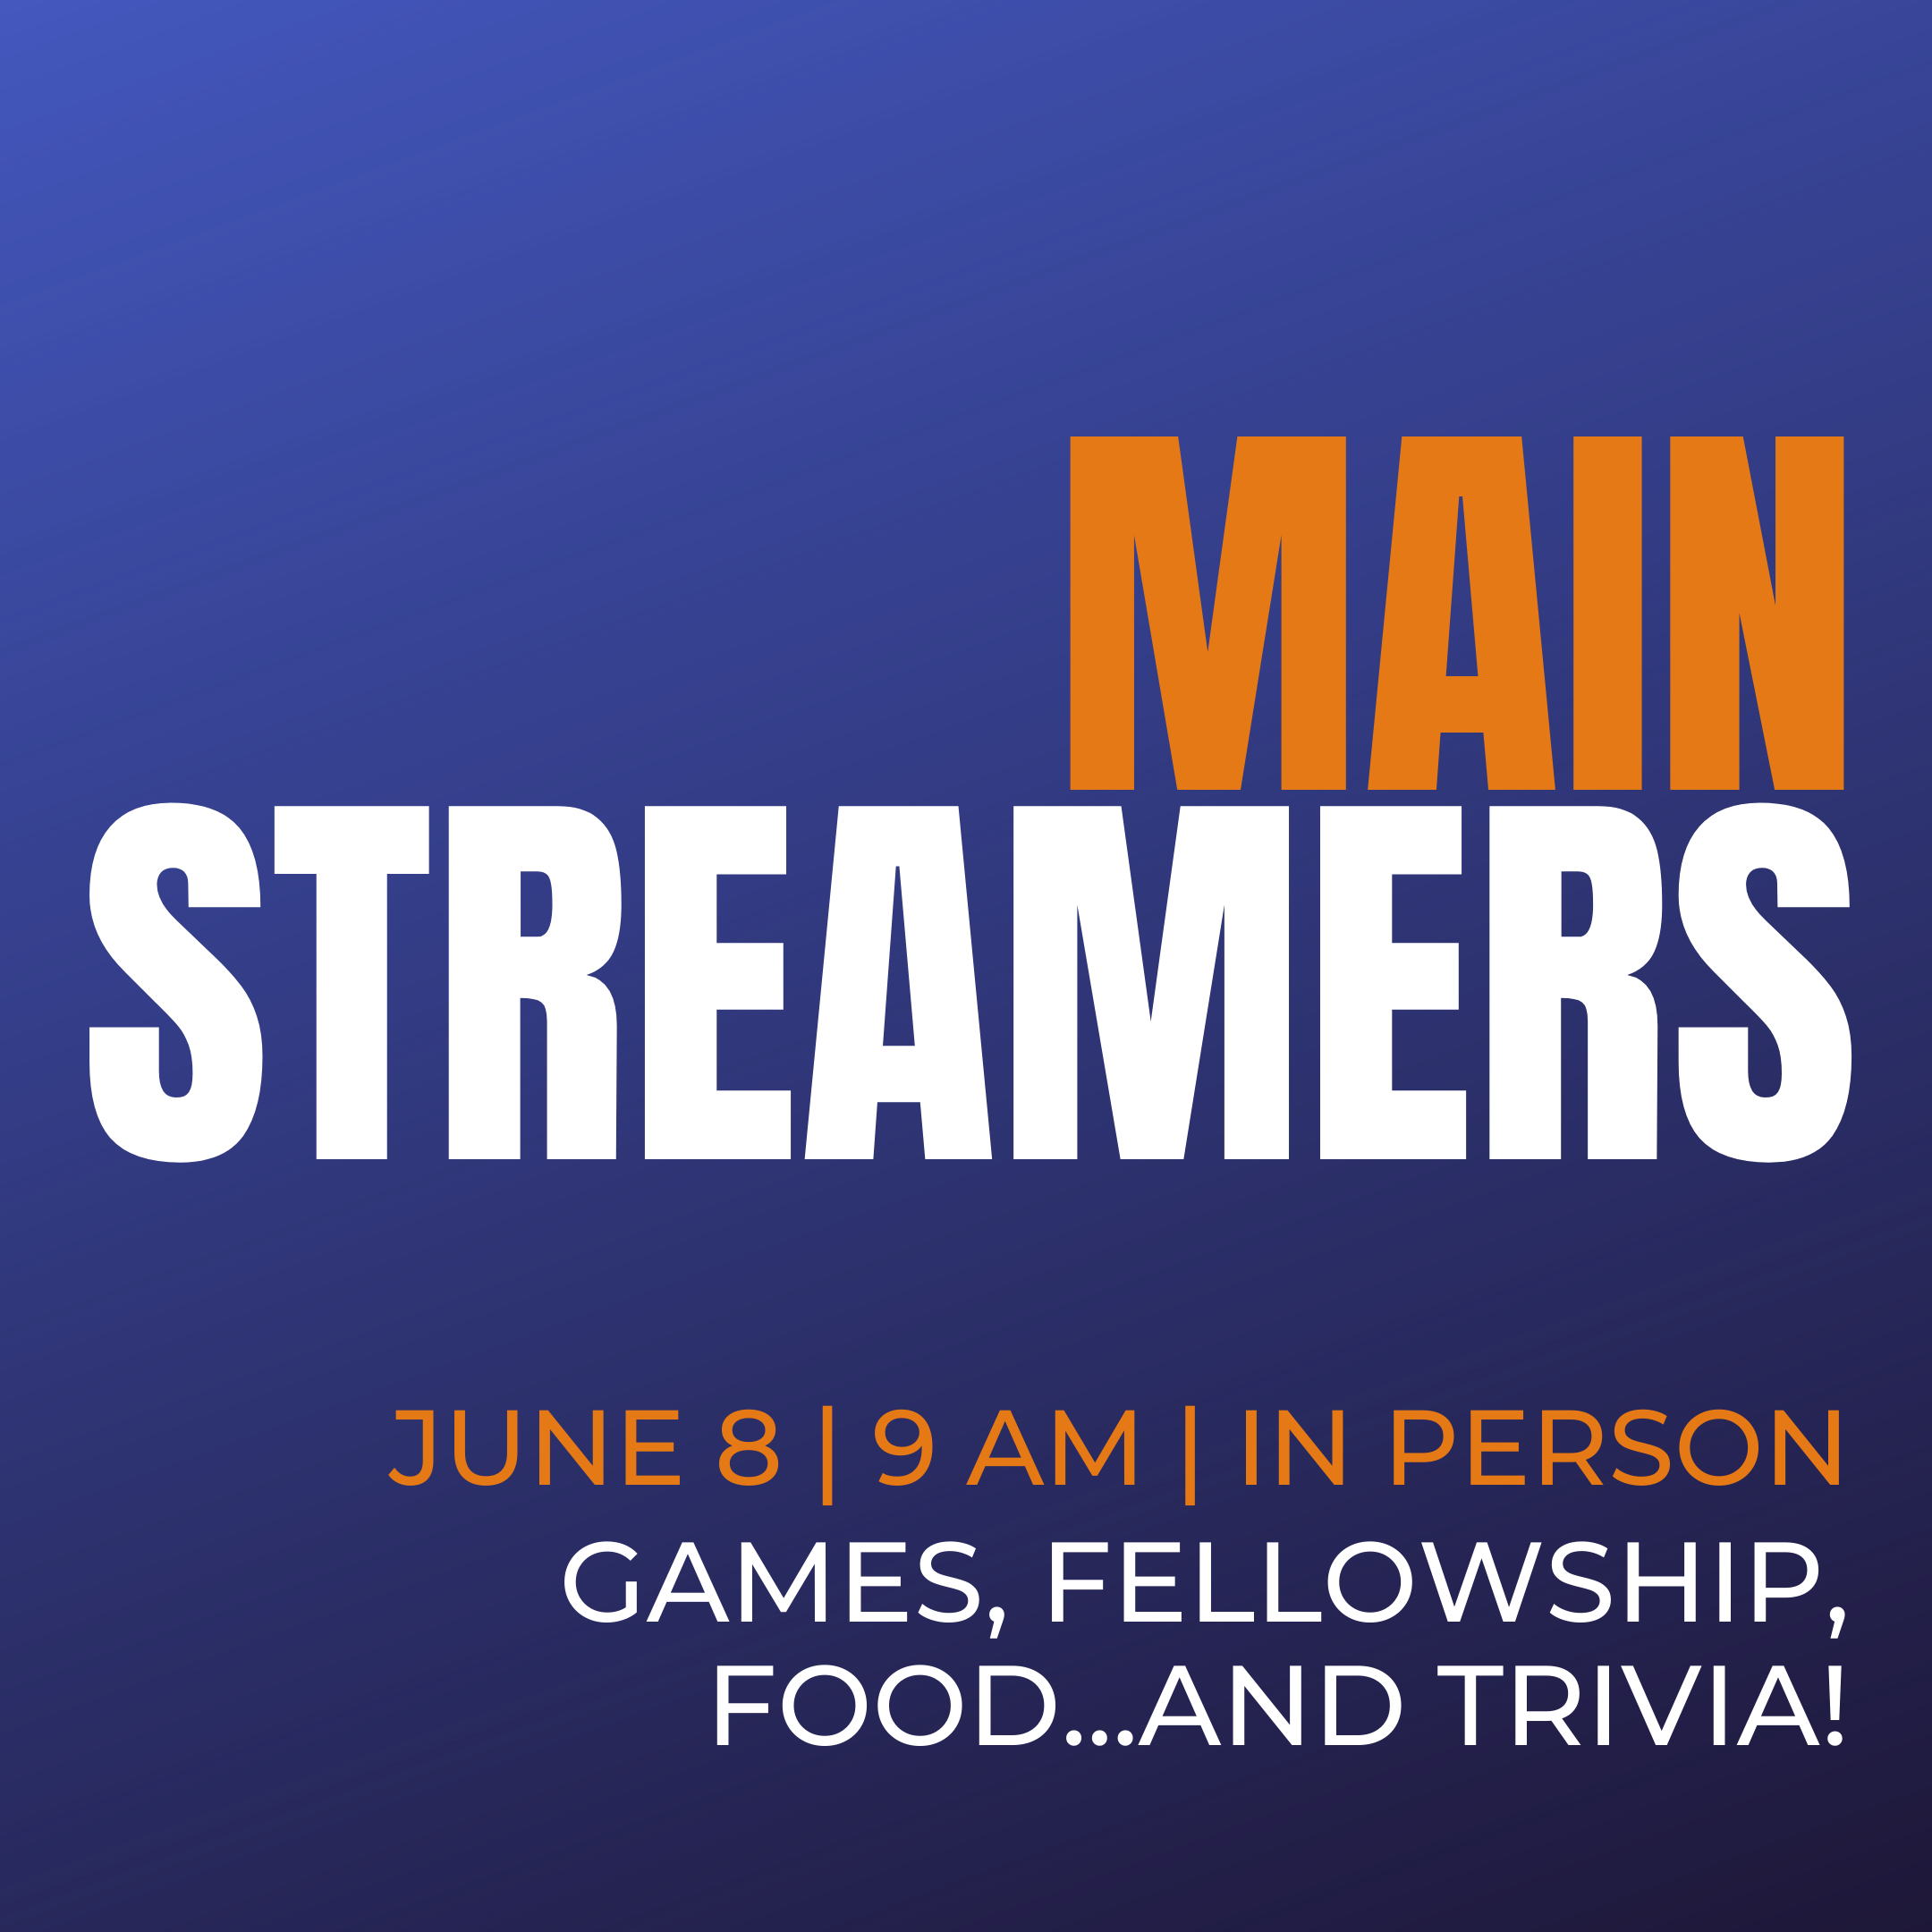 In-Person MainStreamers Resumes